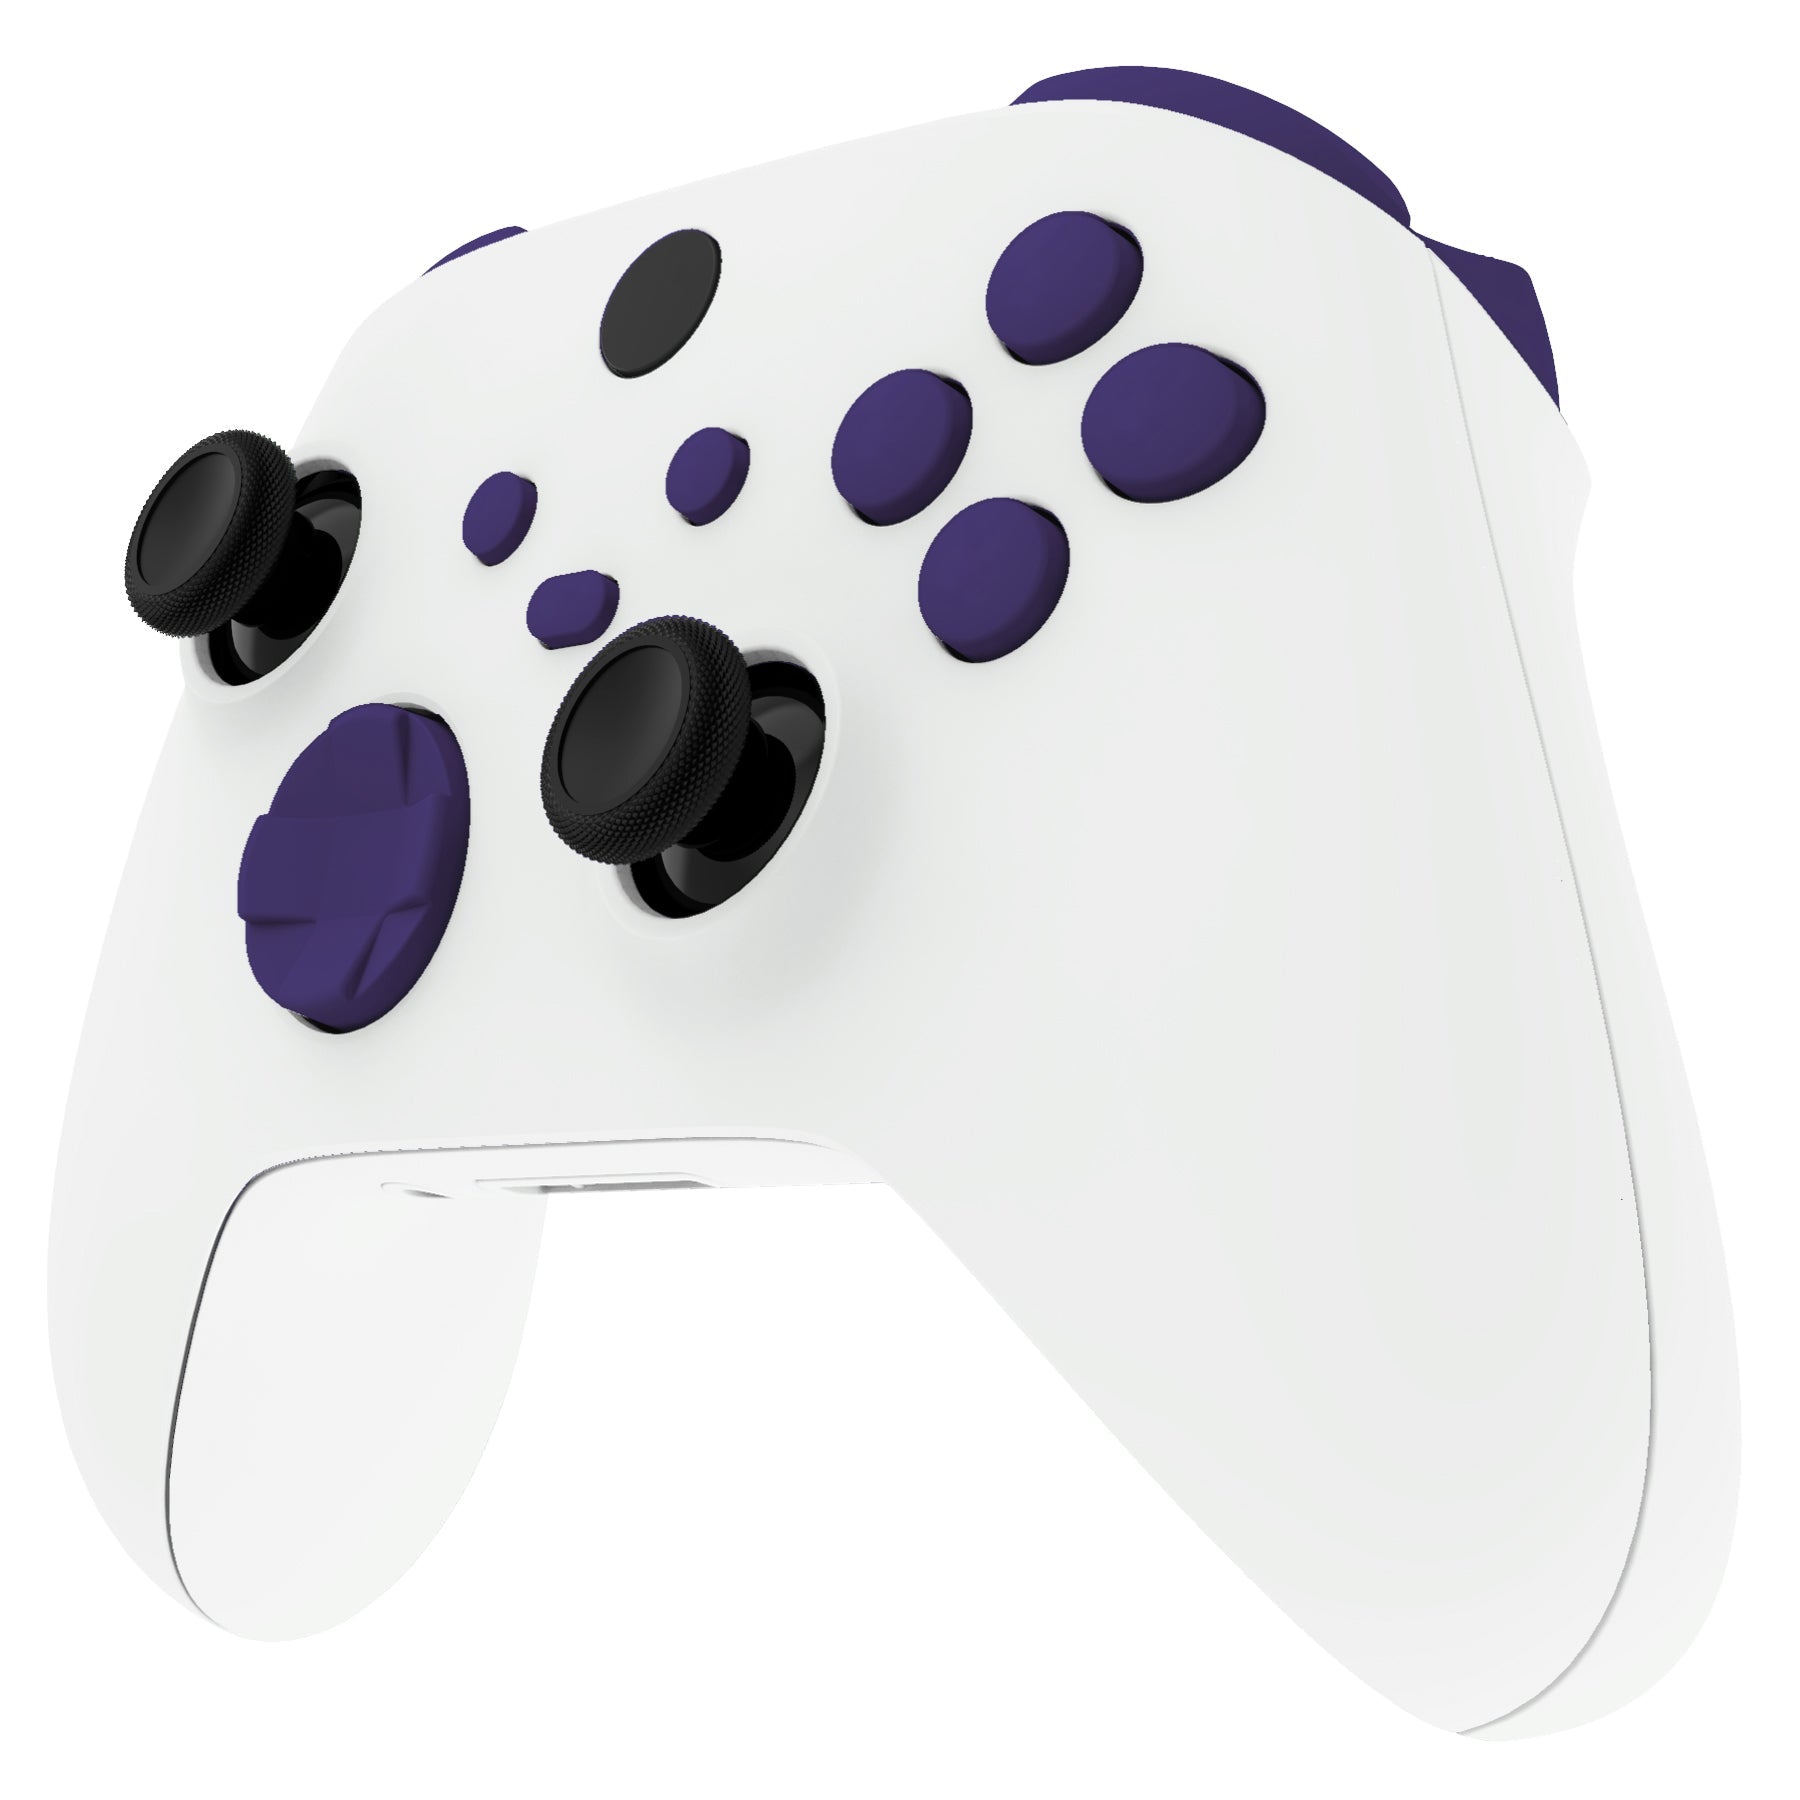 eXtremeRate Retail No Letter Imprint Custom Full Set Buttons for Xbox Series X/S Controller, Purple Replacement Accessories Bumpers Triggers Dpad ABXY Buttons for Xbox Series X/S, Xbox Core Controller - JX3507